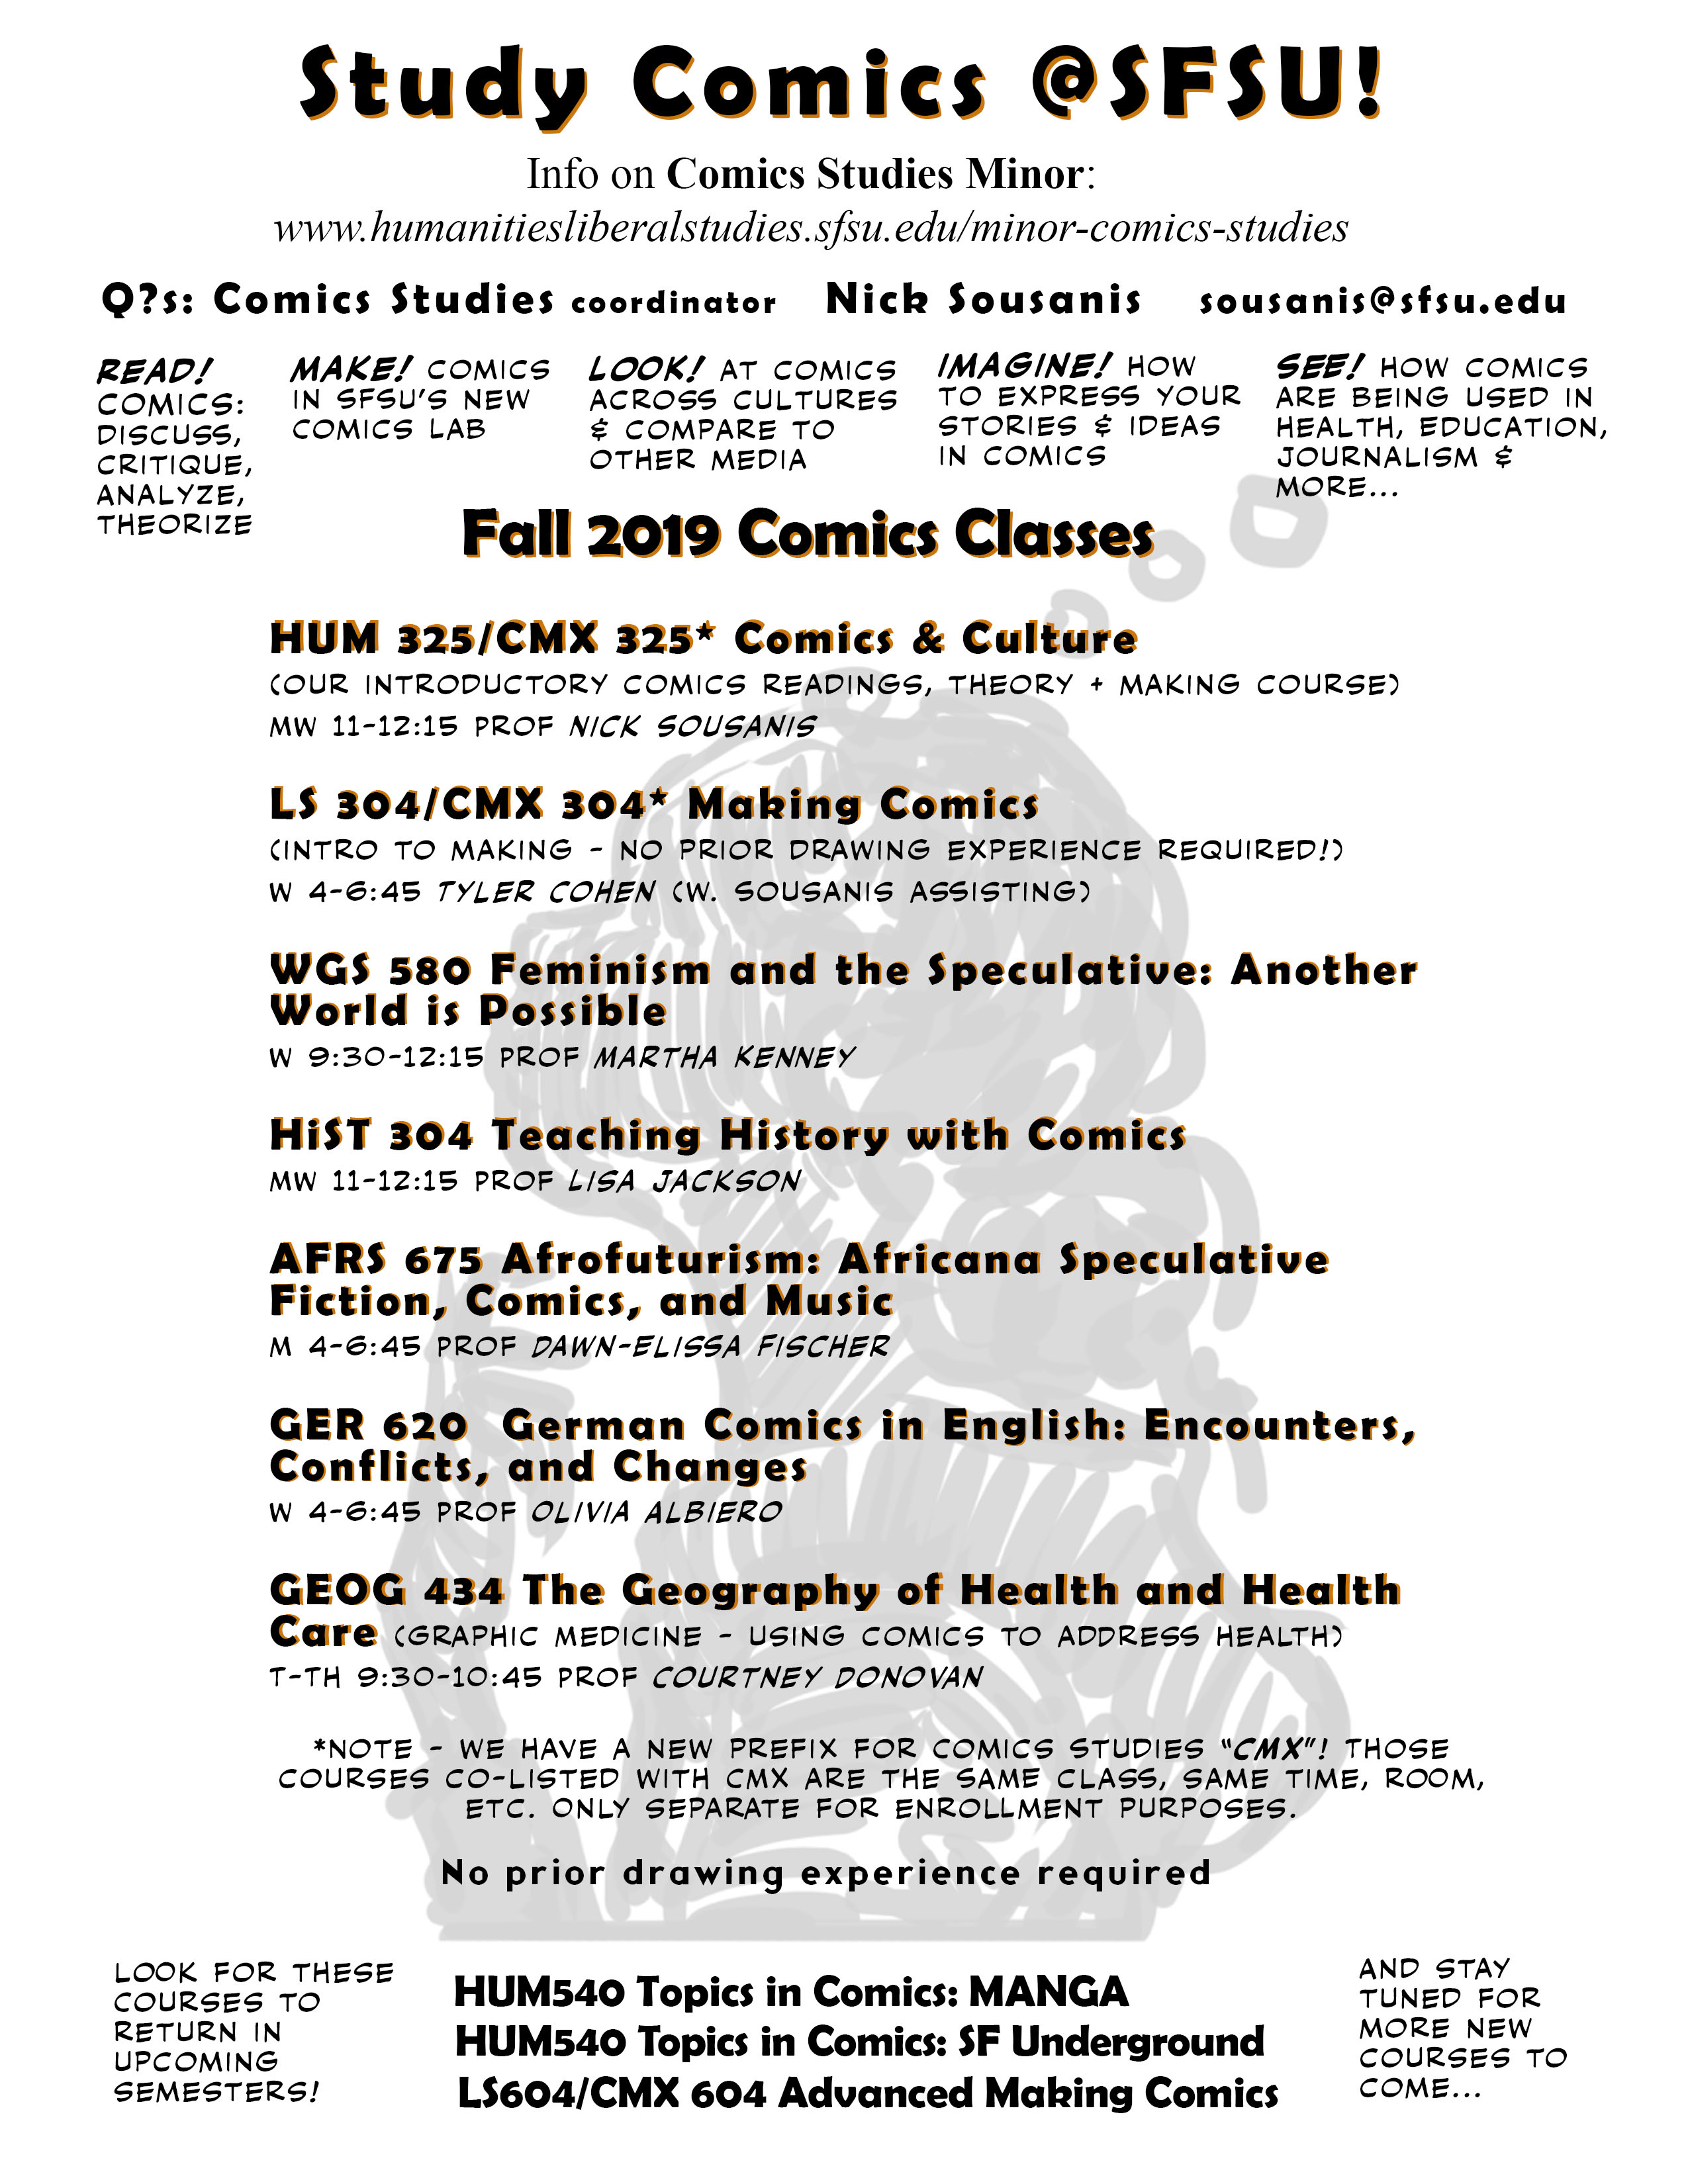 Fall 2019 Courses, illustrated in comic book style